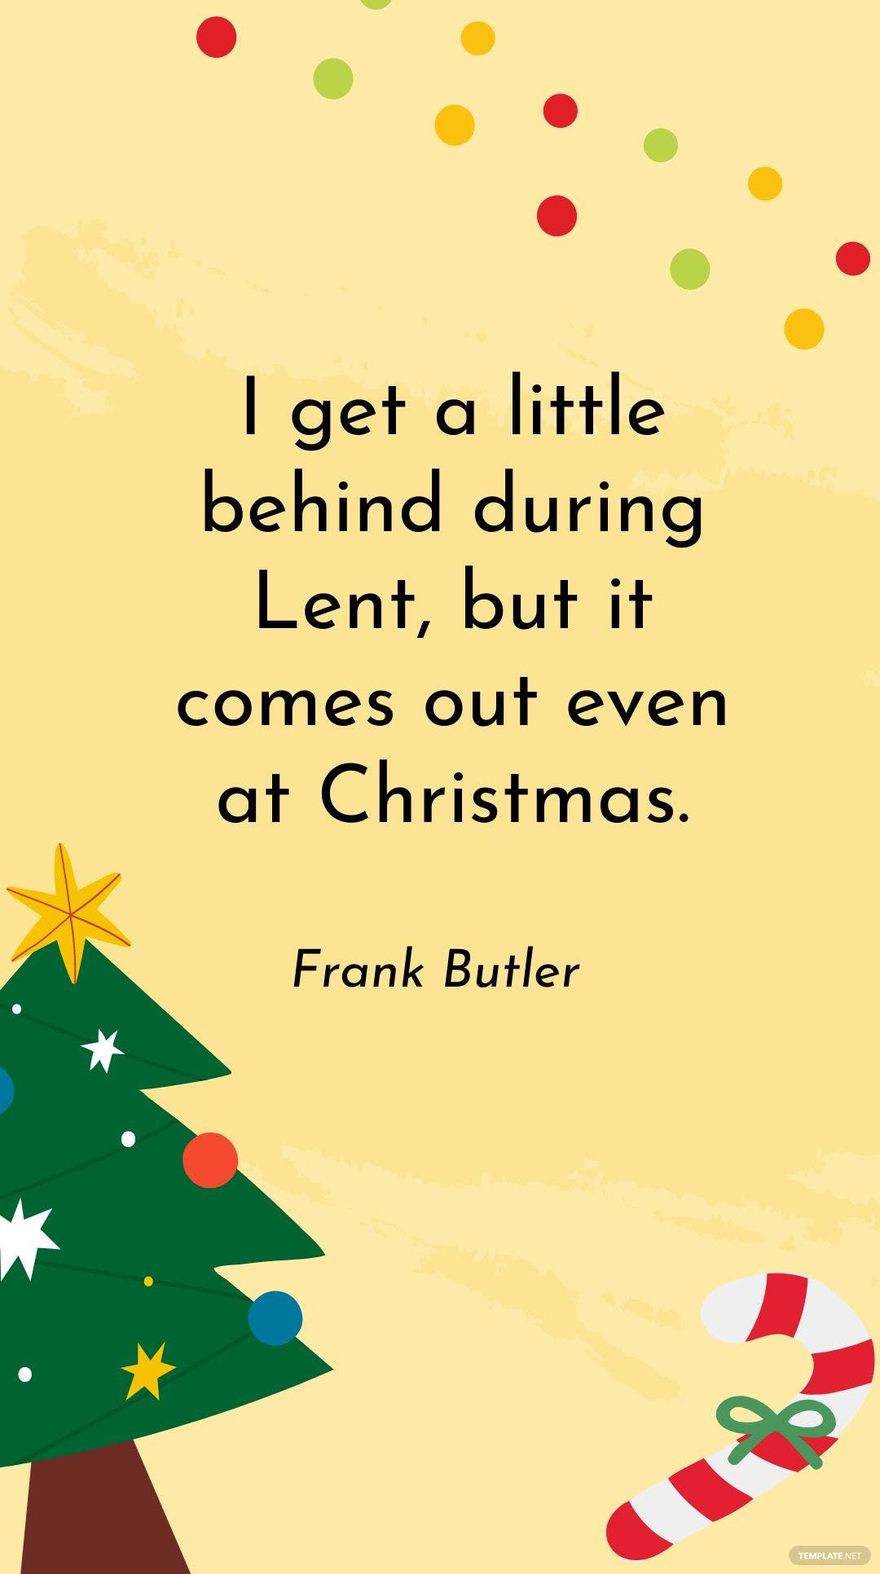 Free Frank Butler - I get a little behind during Lent, but it comes out even at Christmas. in JPG